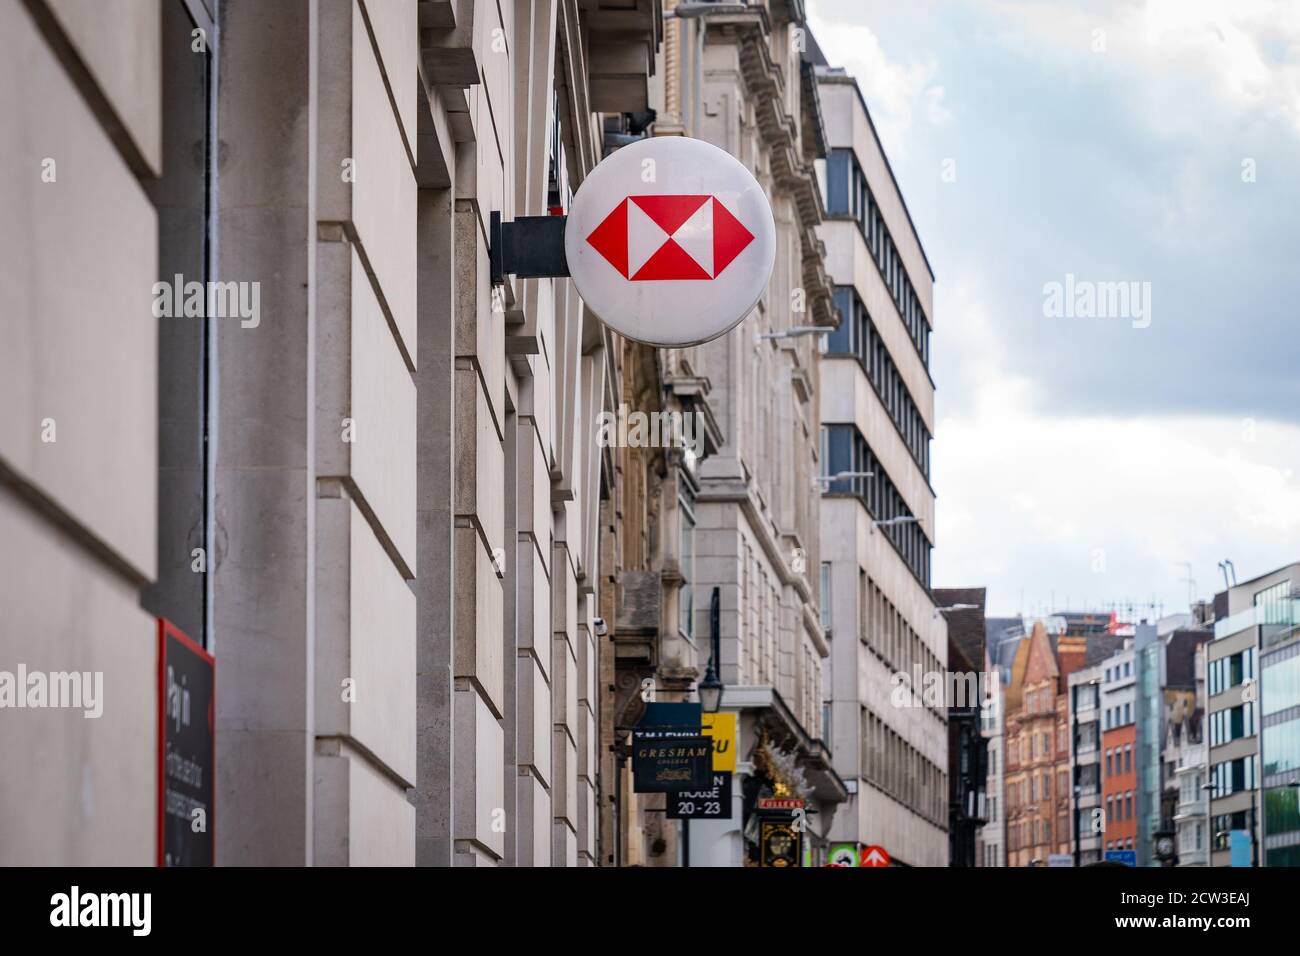 LONDON, ENGLAND - JULY 24, 2020: HSBC Bank plc signboard logo affixed to the wall of a branch on the High Street at Holborn, London  - 012 Stock Photo